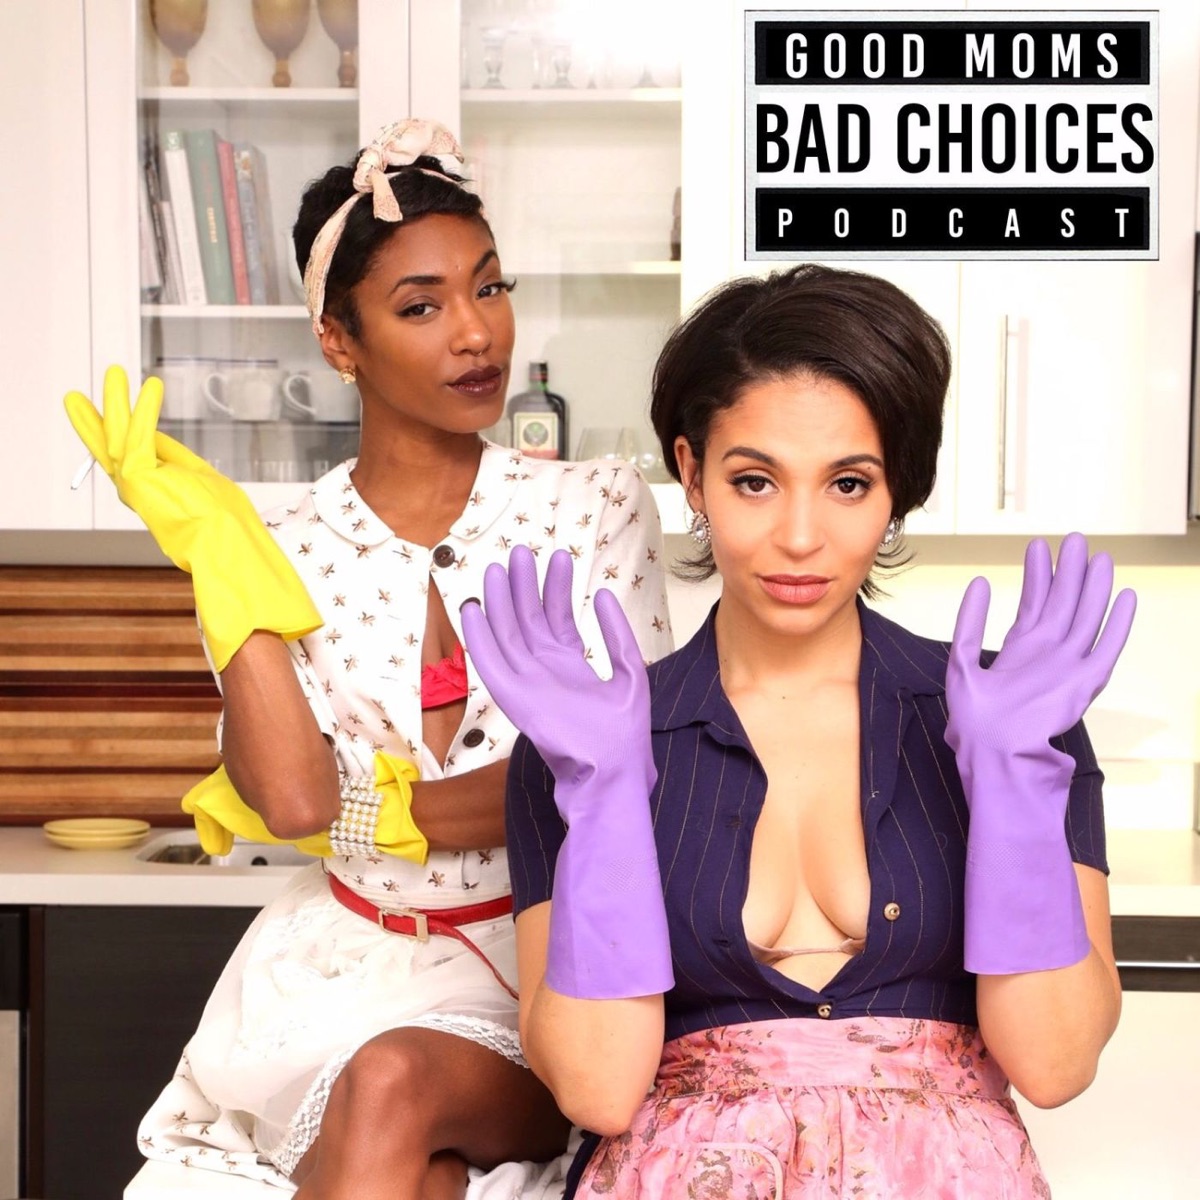 Good Moms Bad Choices - Podcast â€“ Podtail